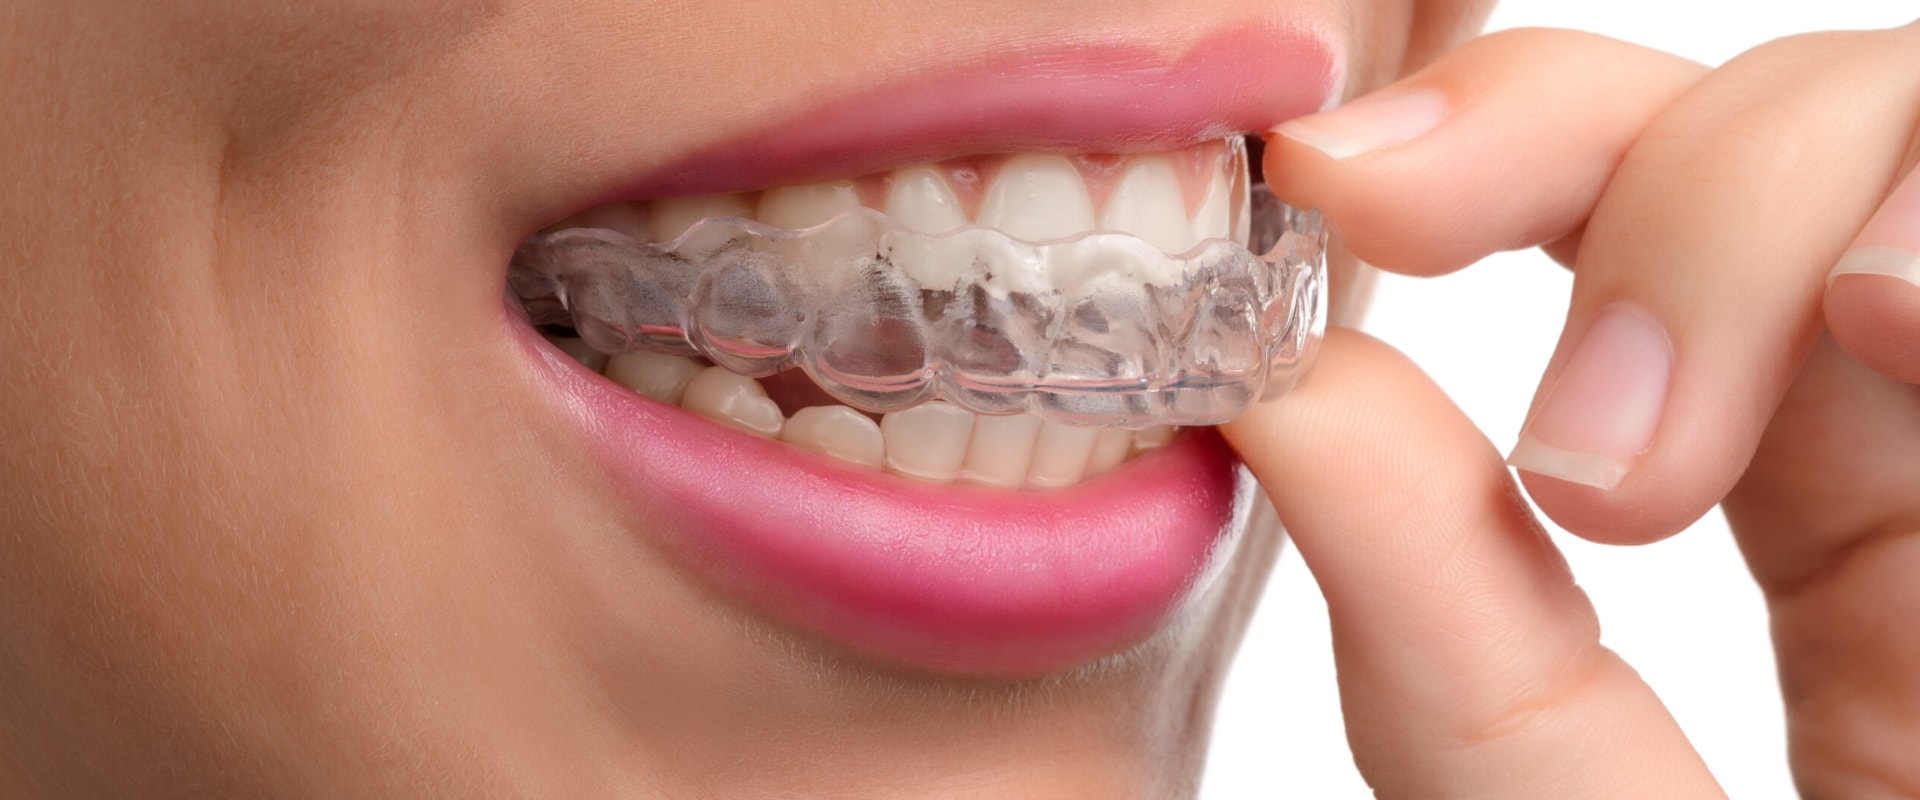 Sedation Options for Orthodontic Treatment: What You Need to Know